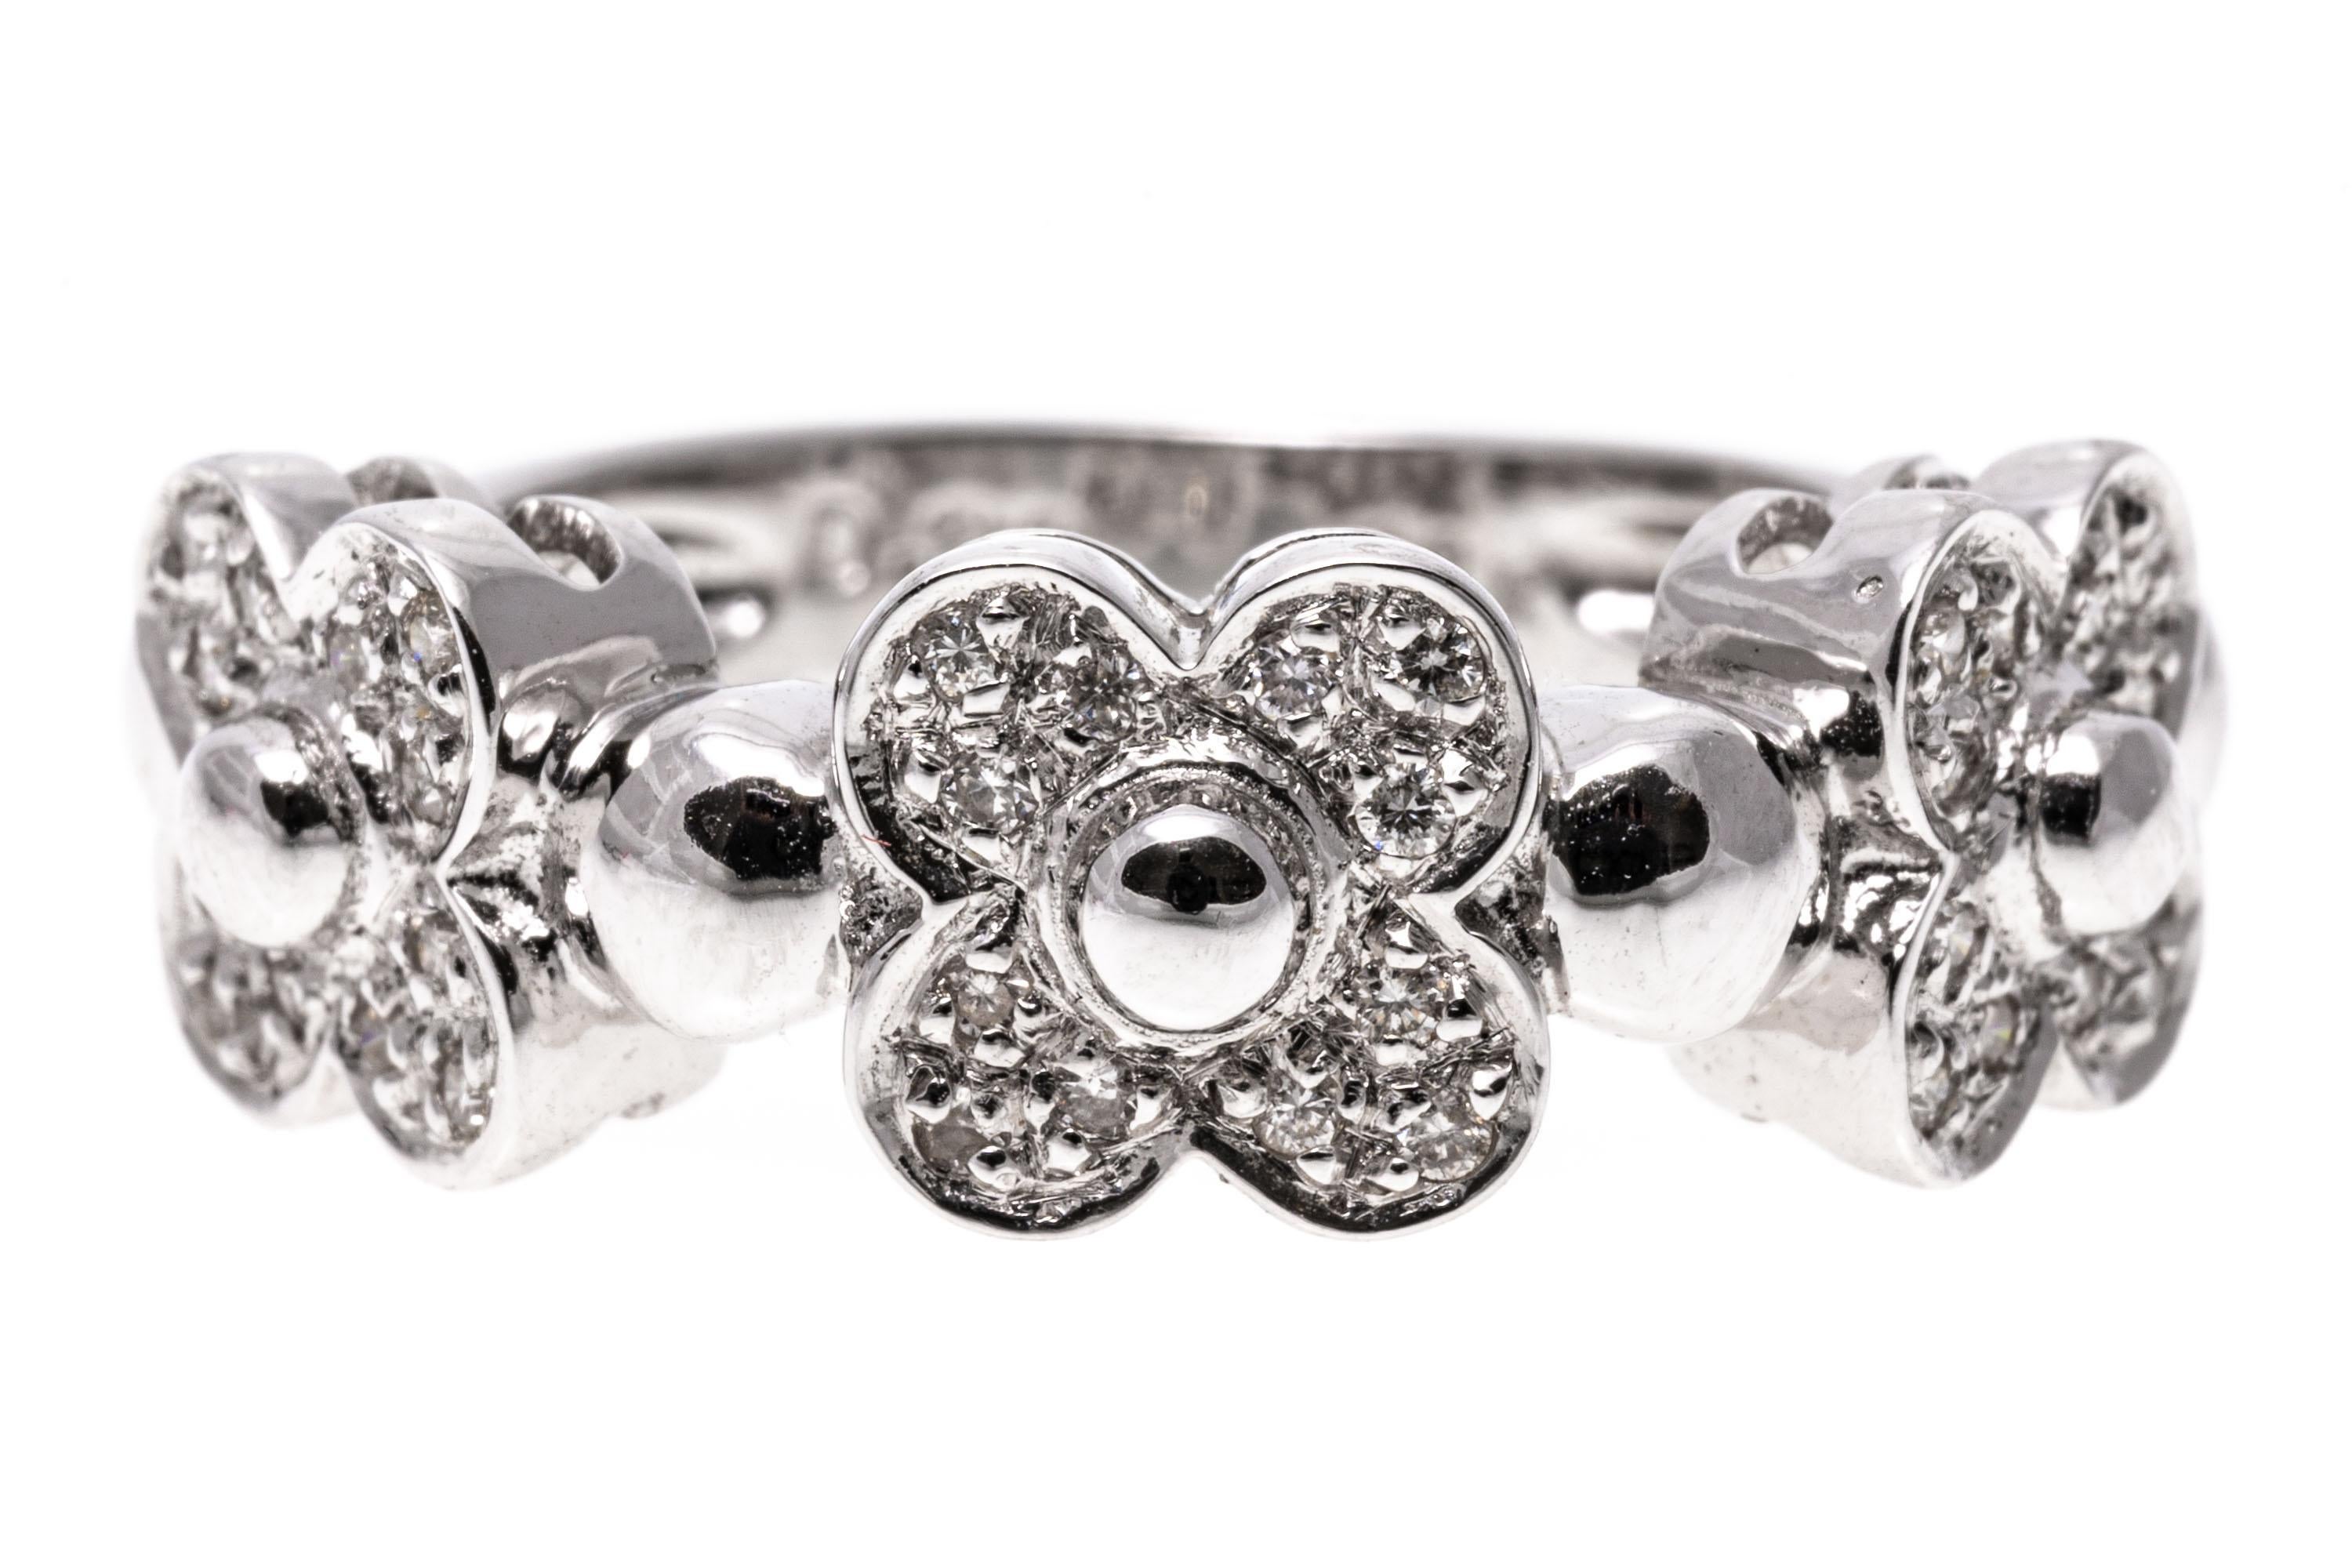 18k white gold ring. This charming ring has three, quatrefoil flowers, with round faceted, pave set petals, 0.20 TCW, alternating with round high polished domes..
Marks: 18k
Dimensions: 15/16